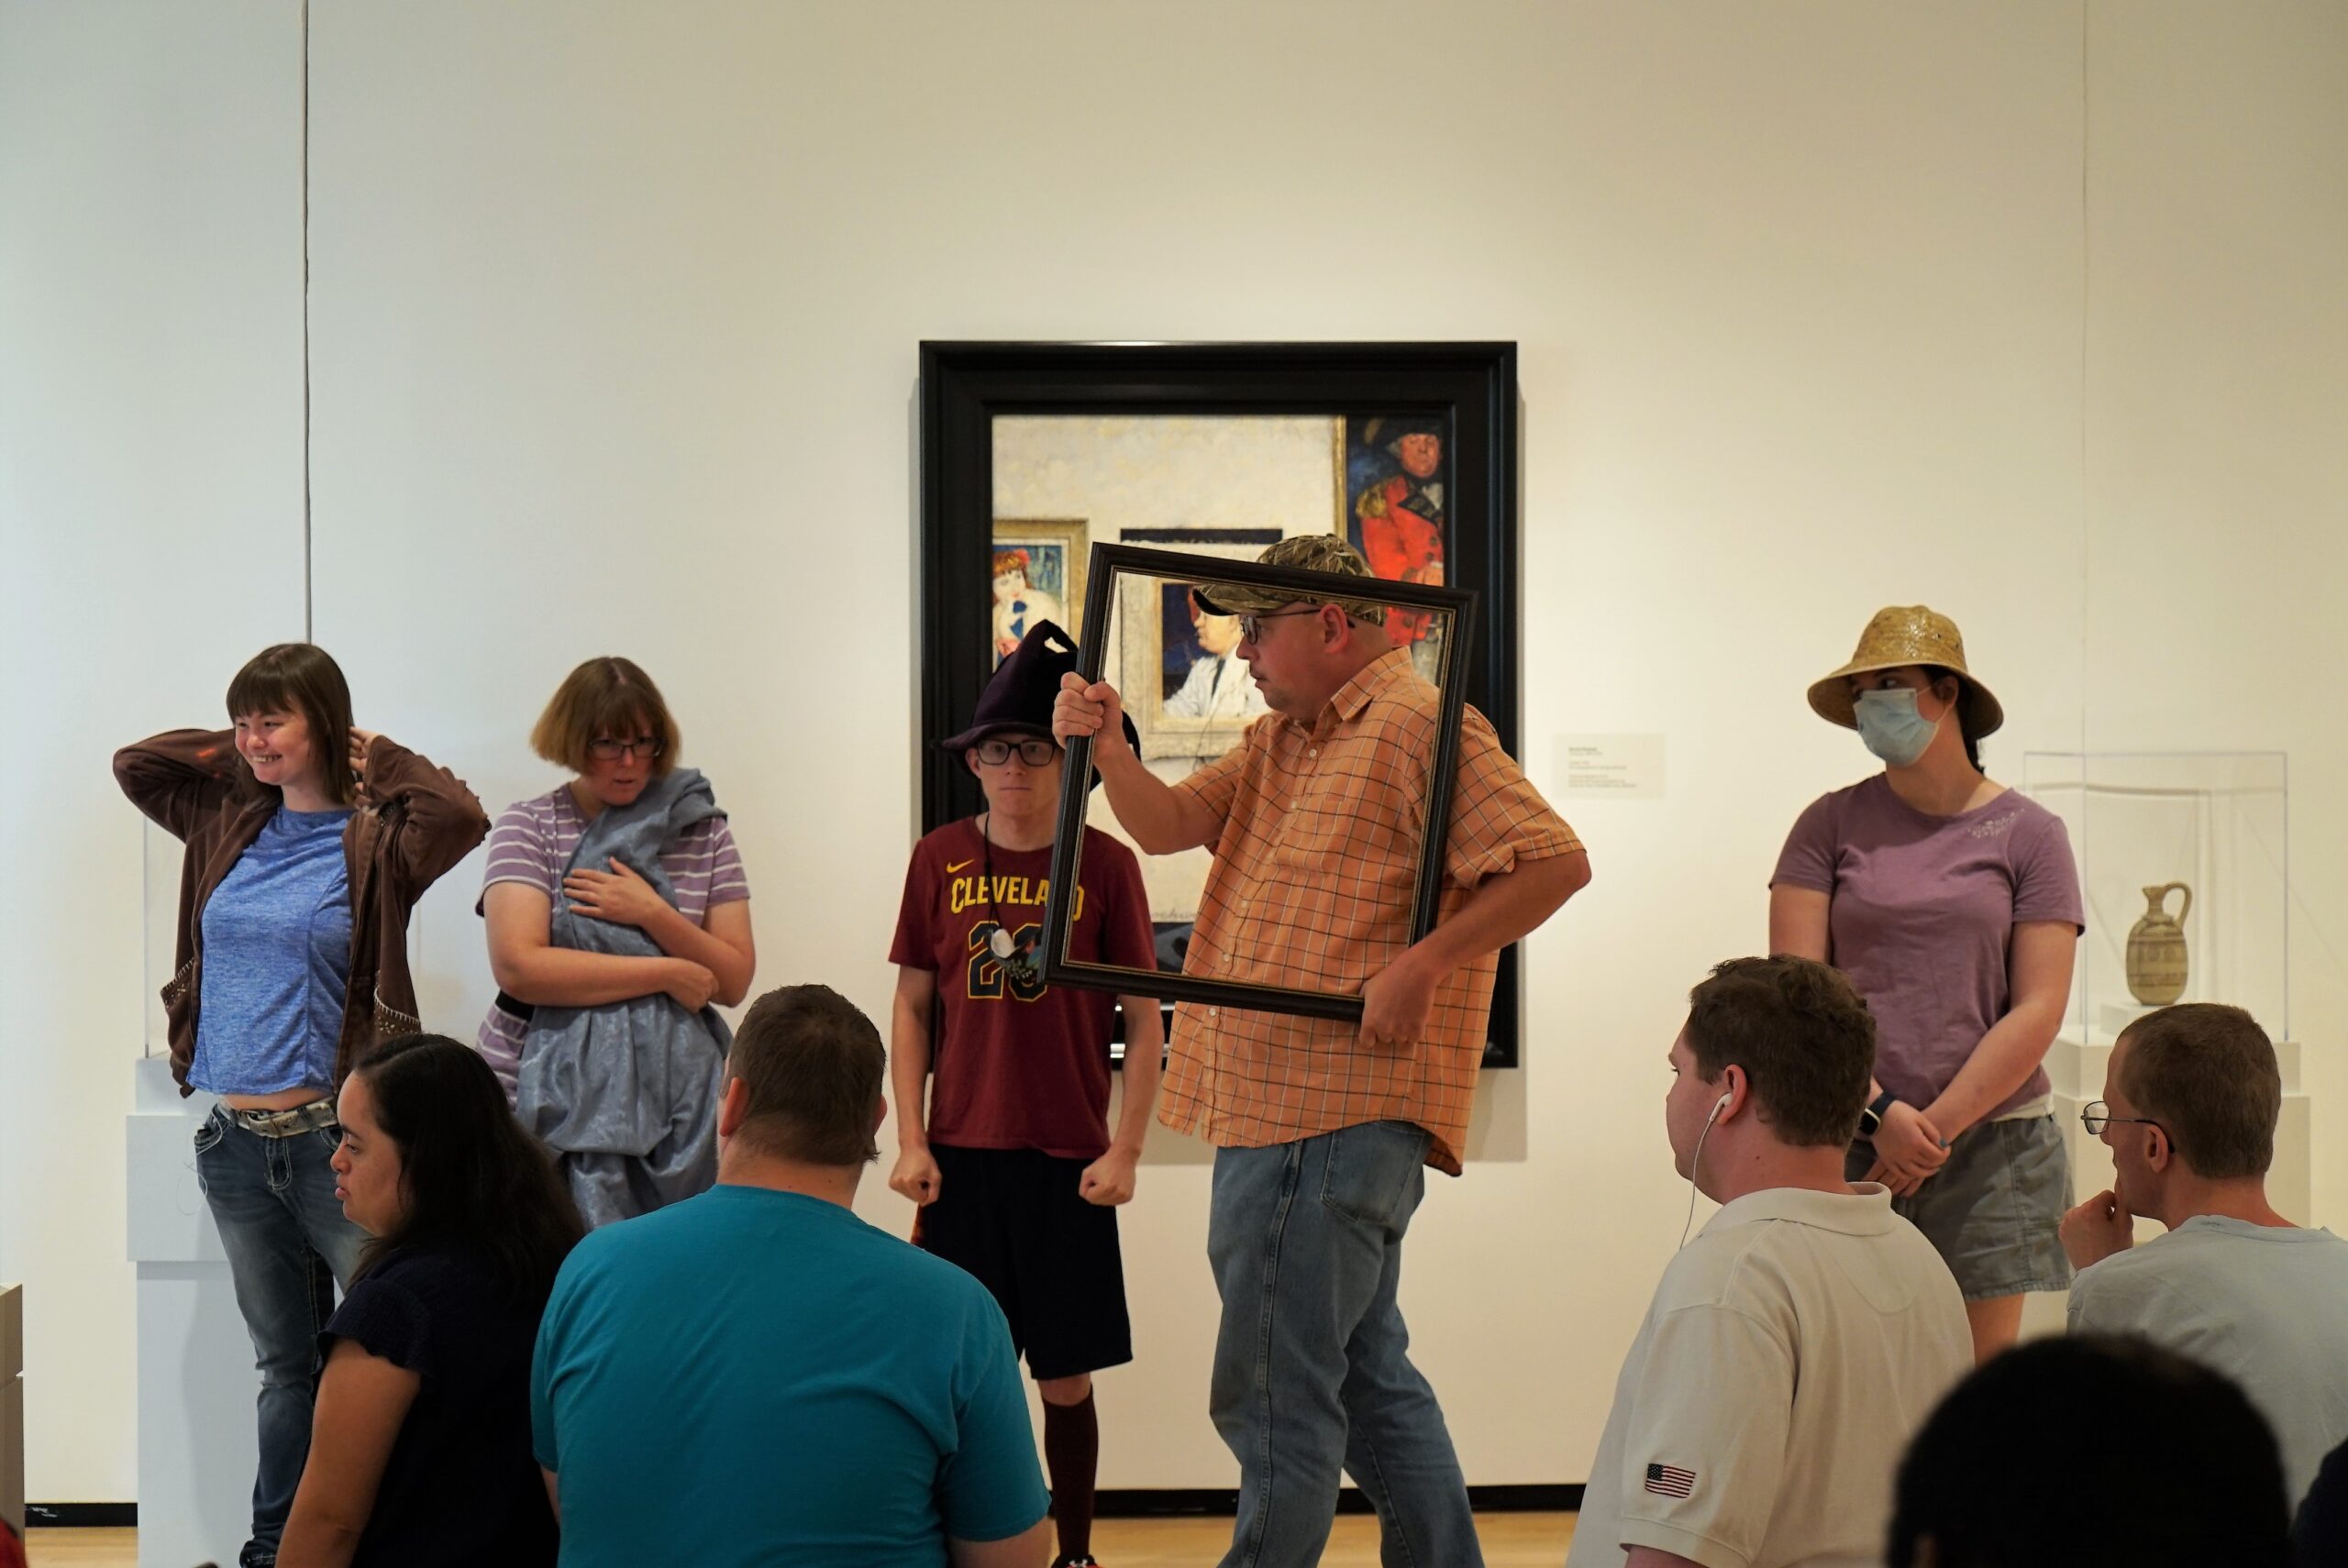 A man carrying a picture frame through a room of art